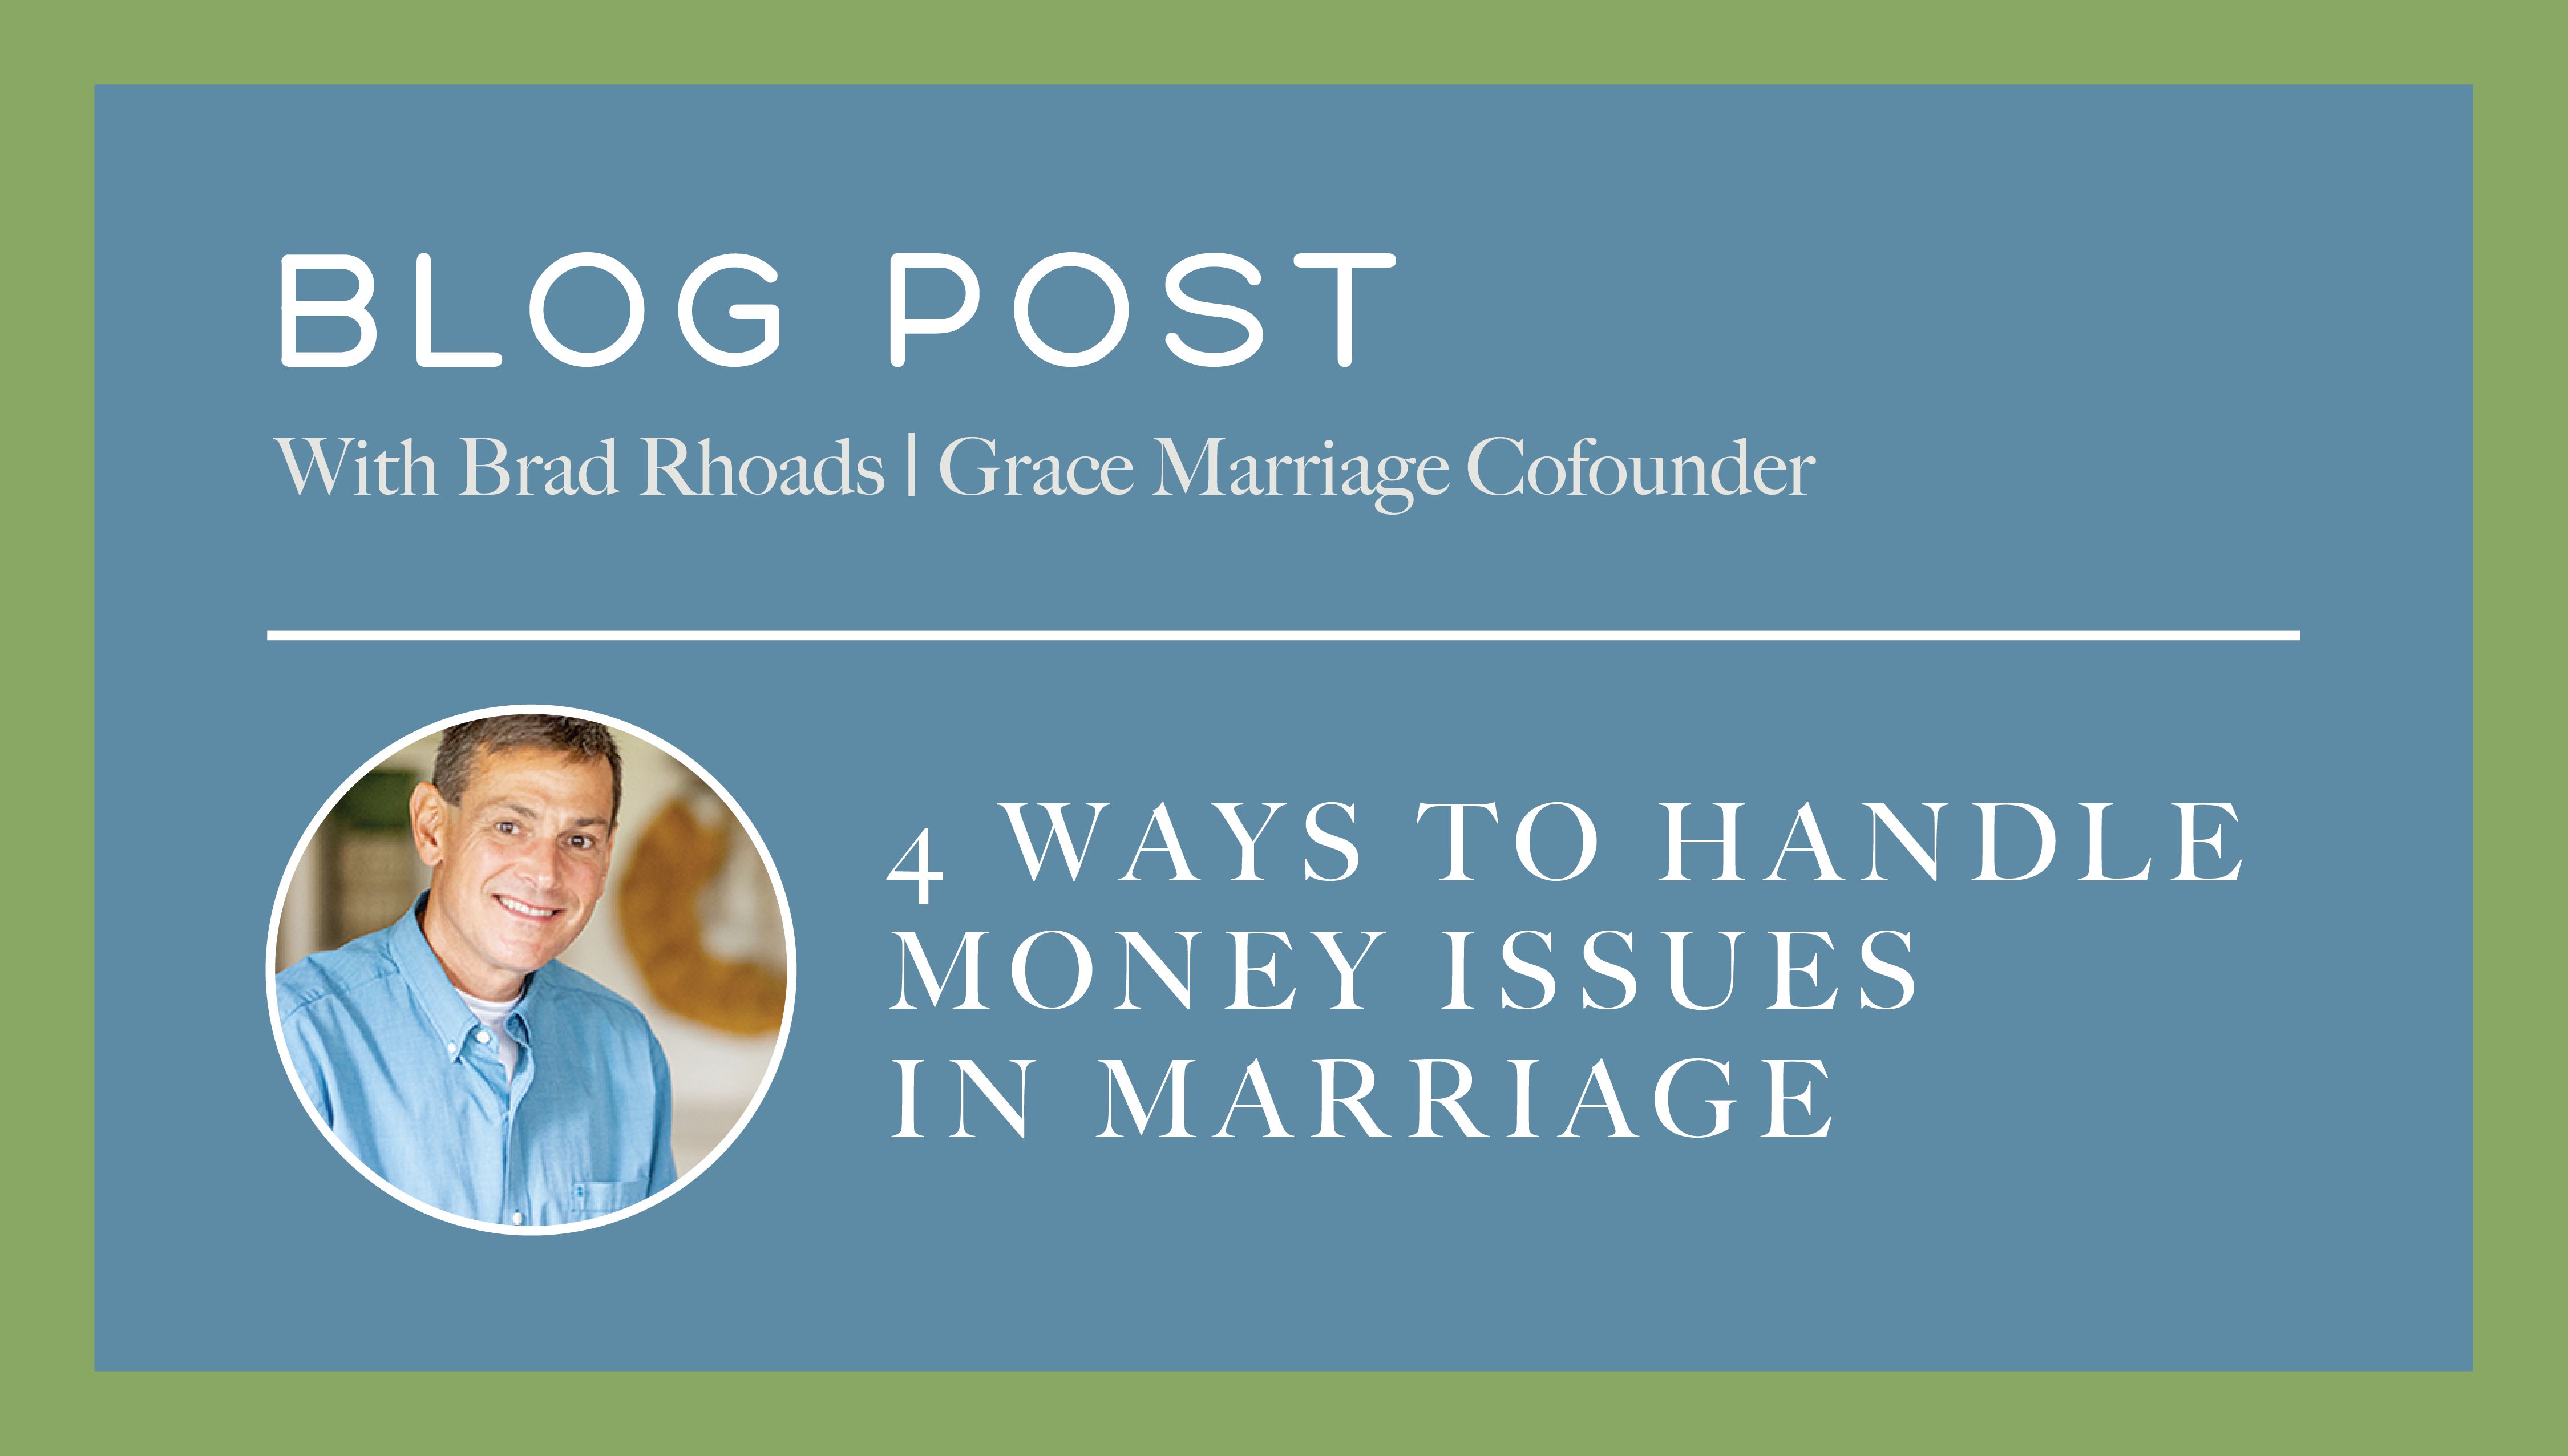 4 Ways to Handle Money Issues in Marriage